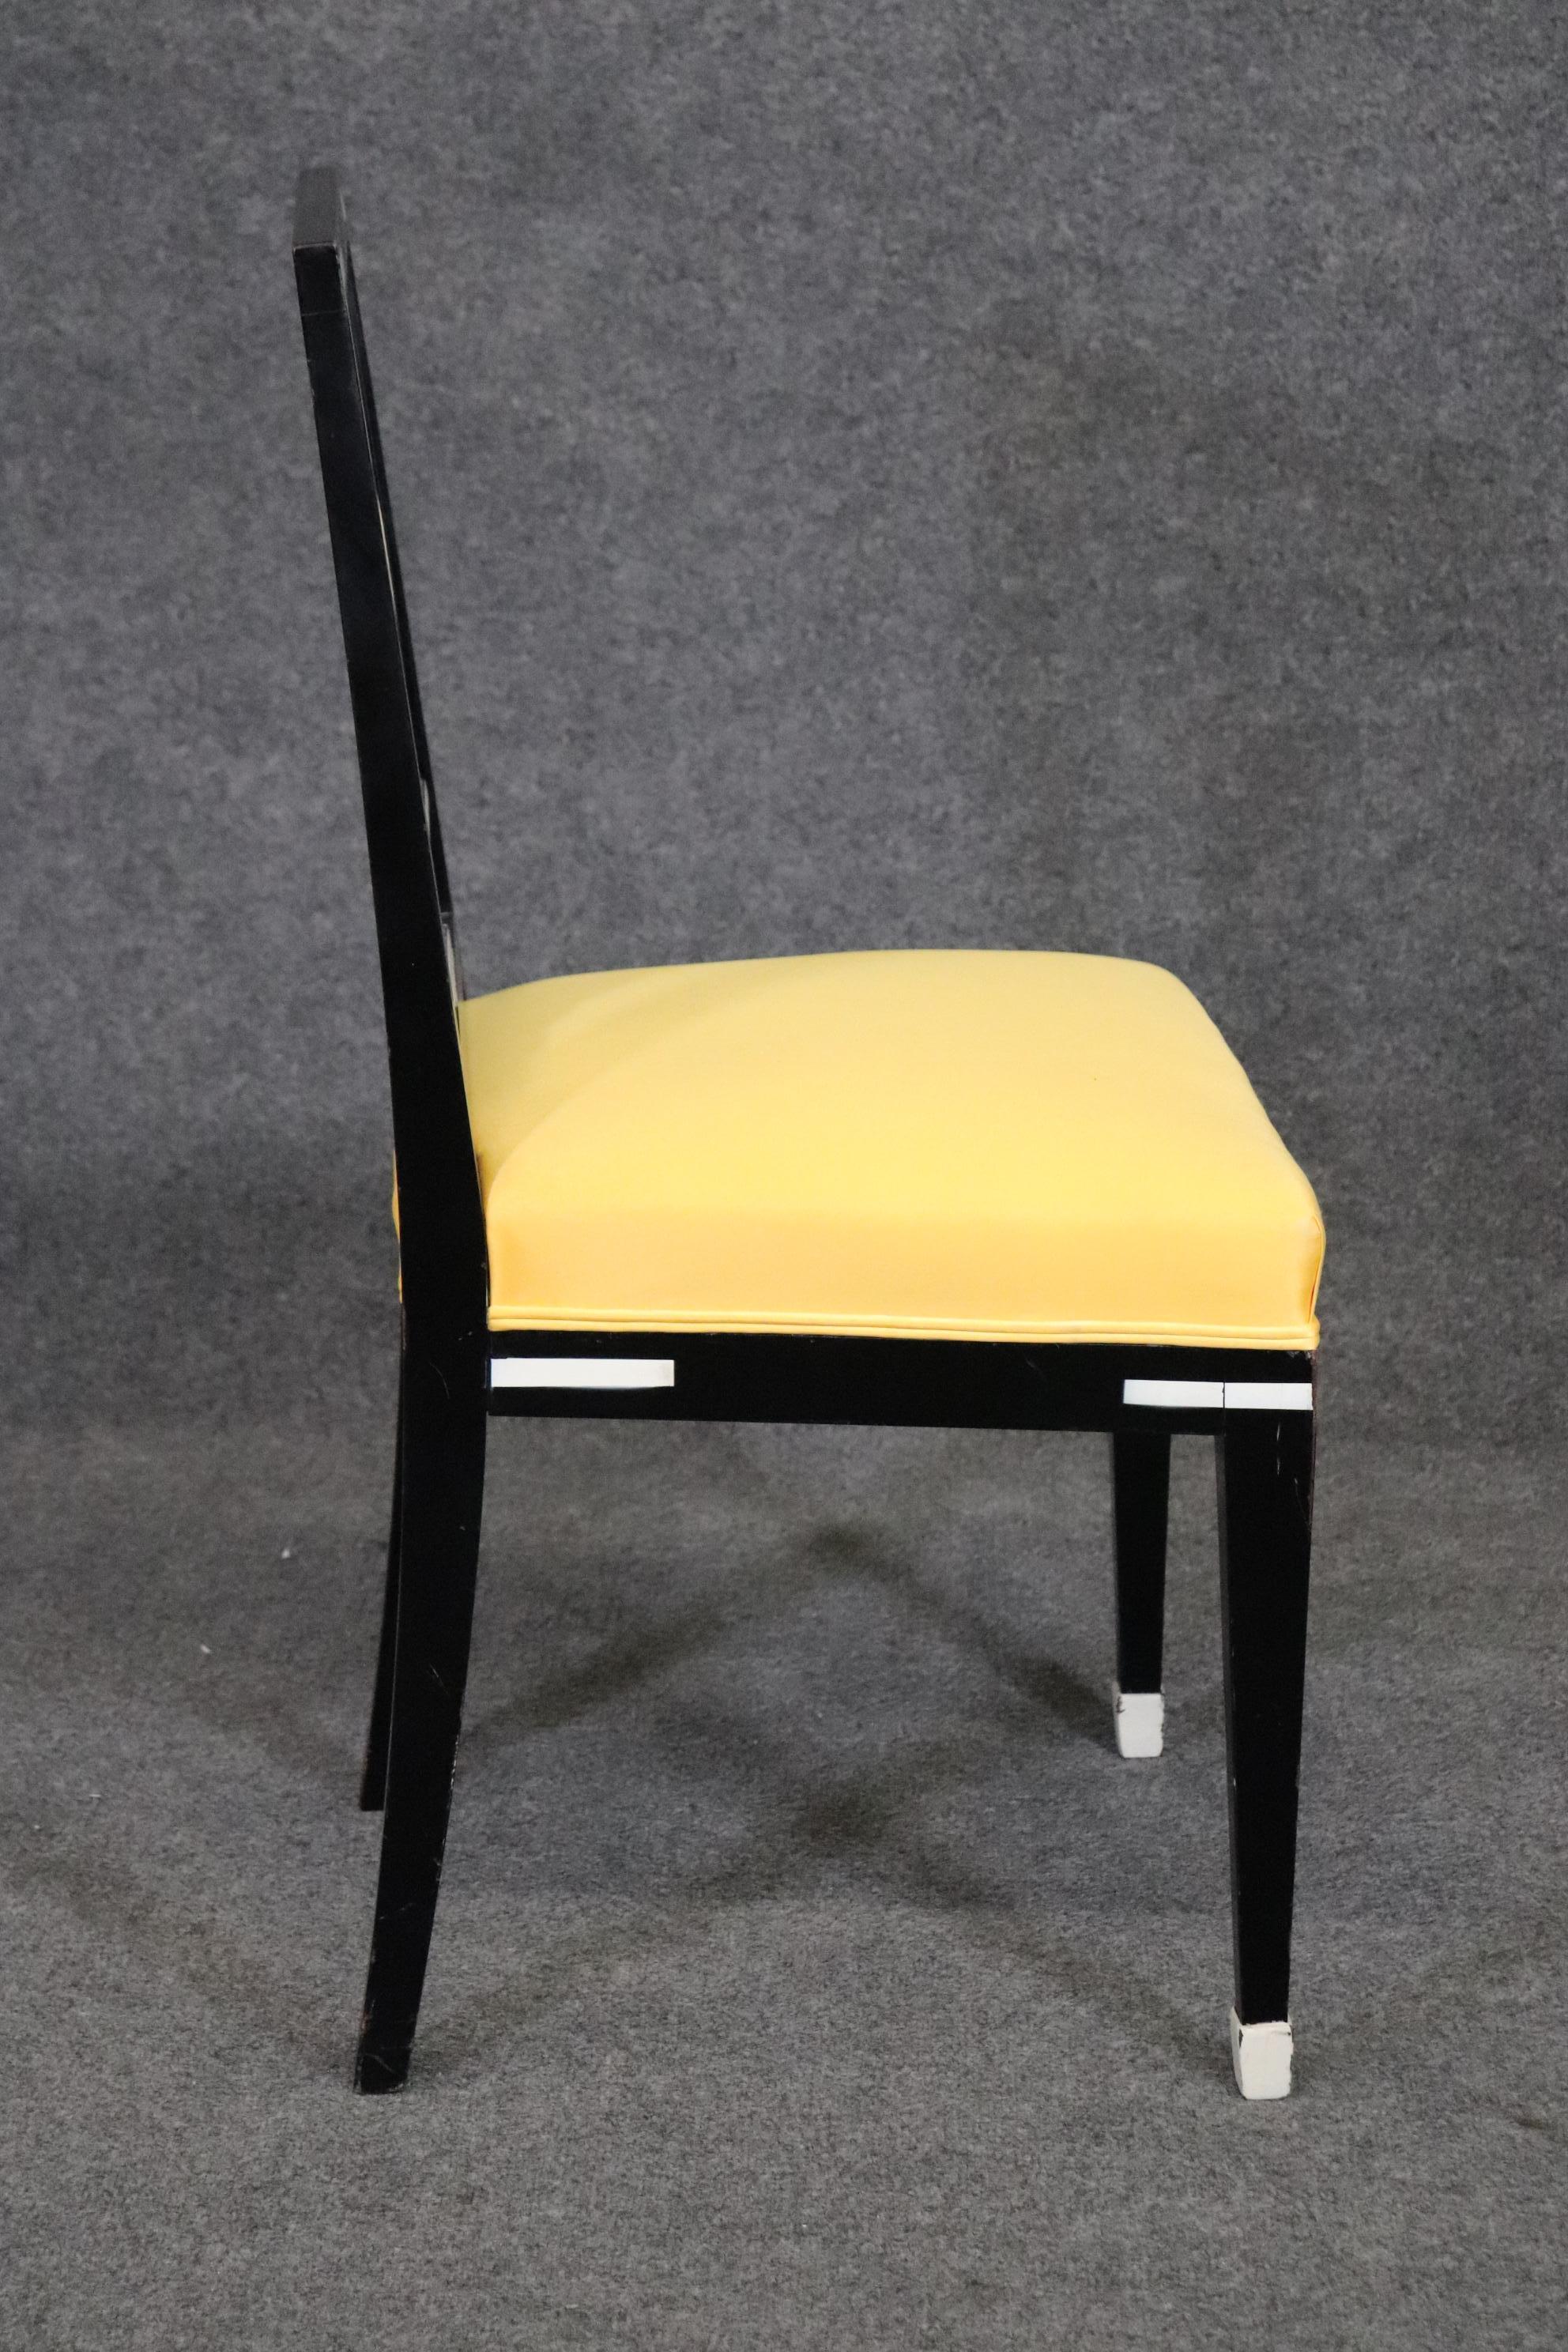 Set of 4 Ebonized French Art Deco Style Dining Chairs in Yellow Upholstery For Sale 4